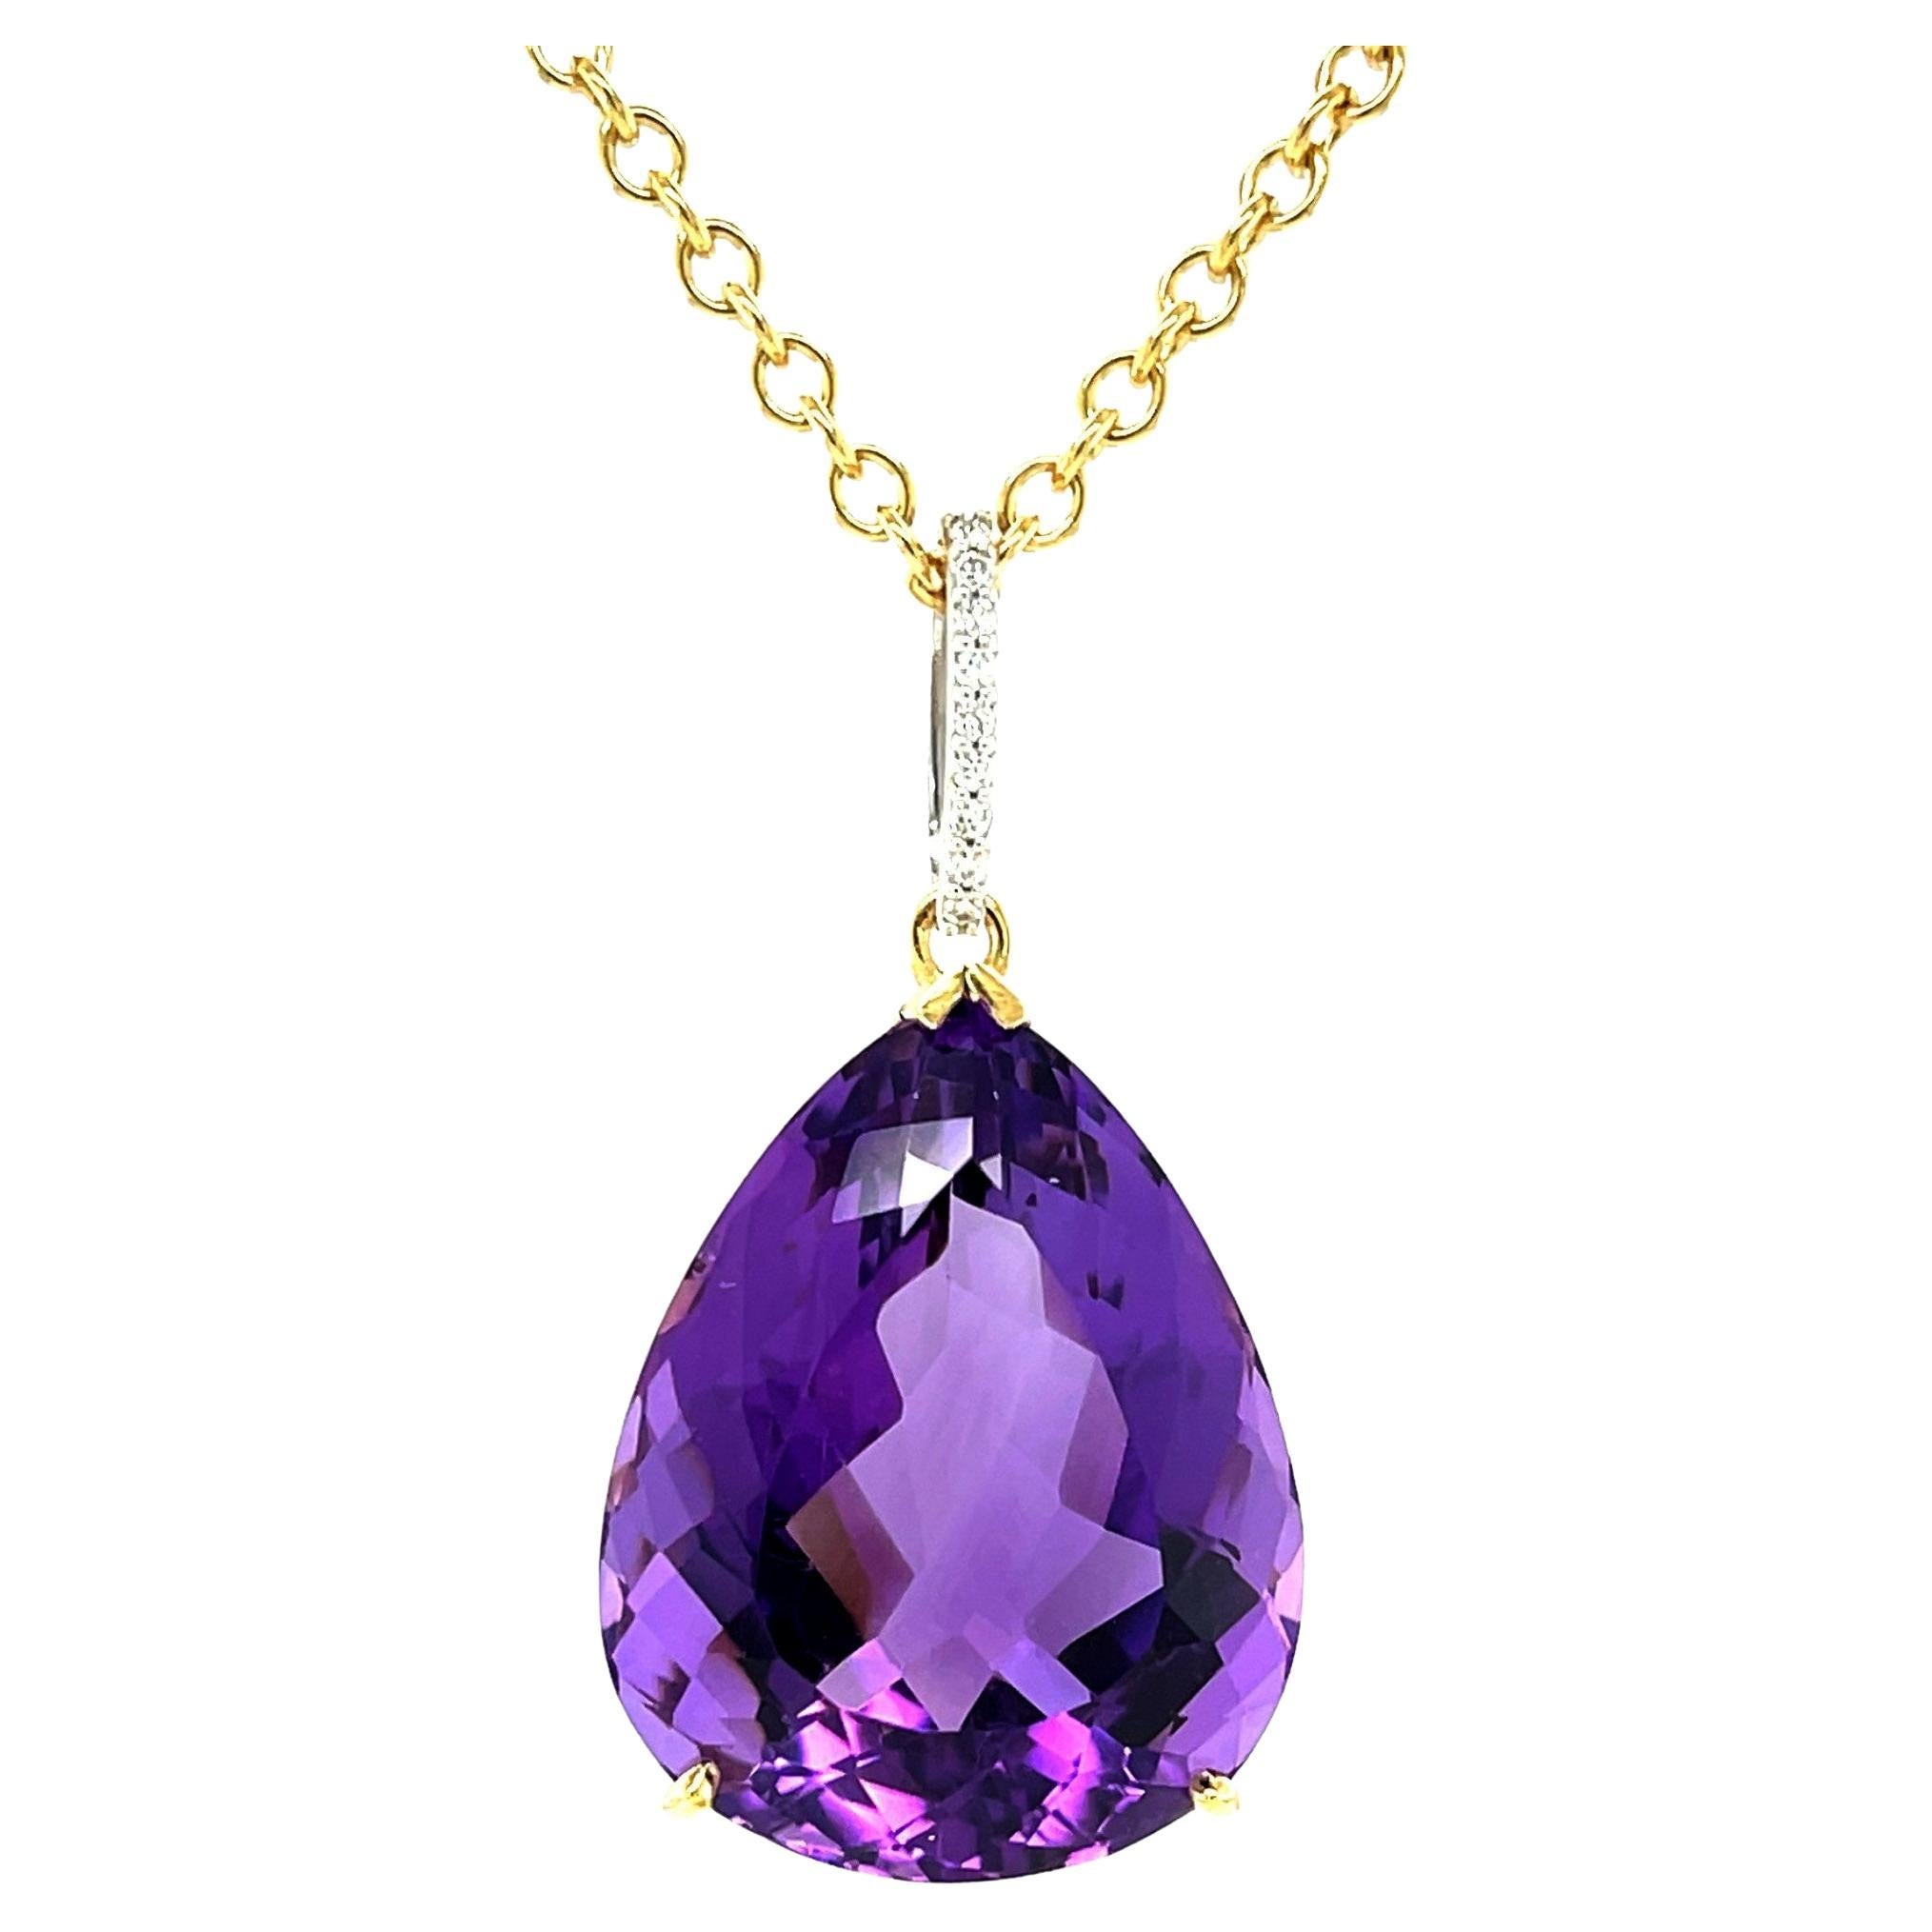 40 Carat Pear Shape Amethyst and Diamond Pendant in 18k Yellow Gold with Chain